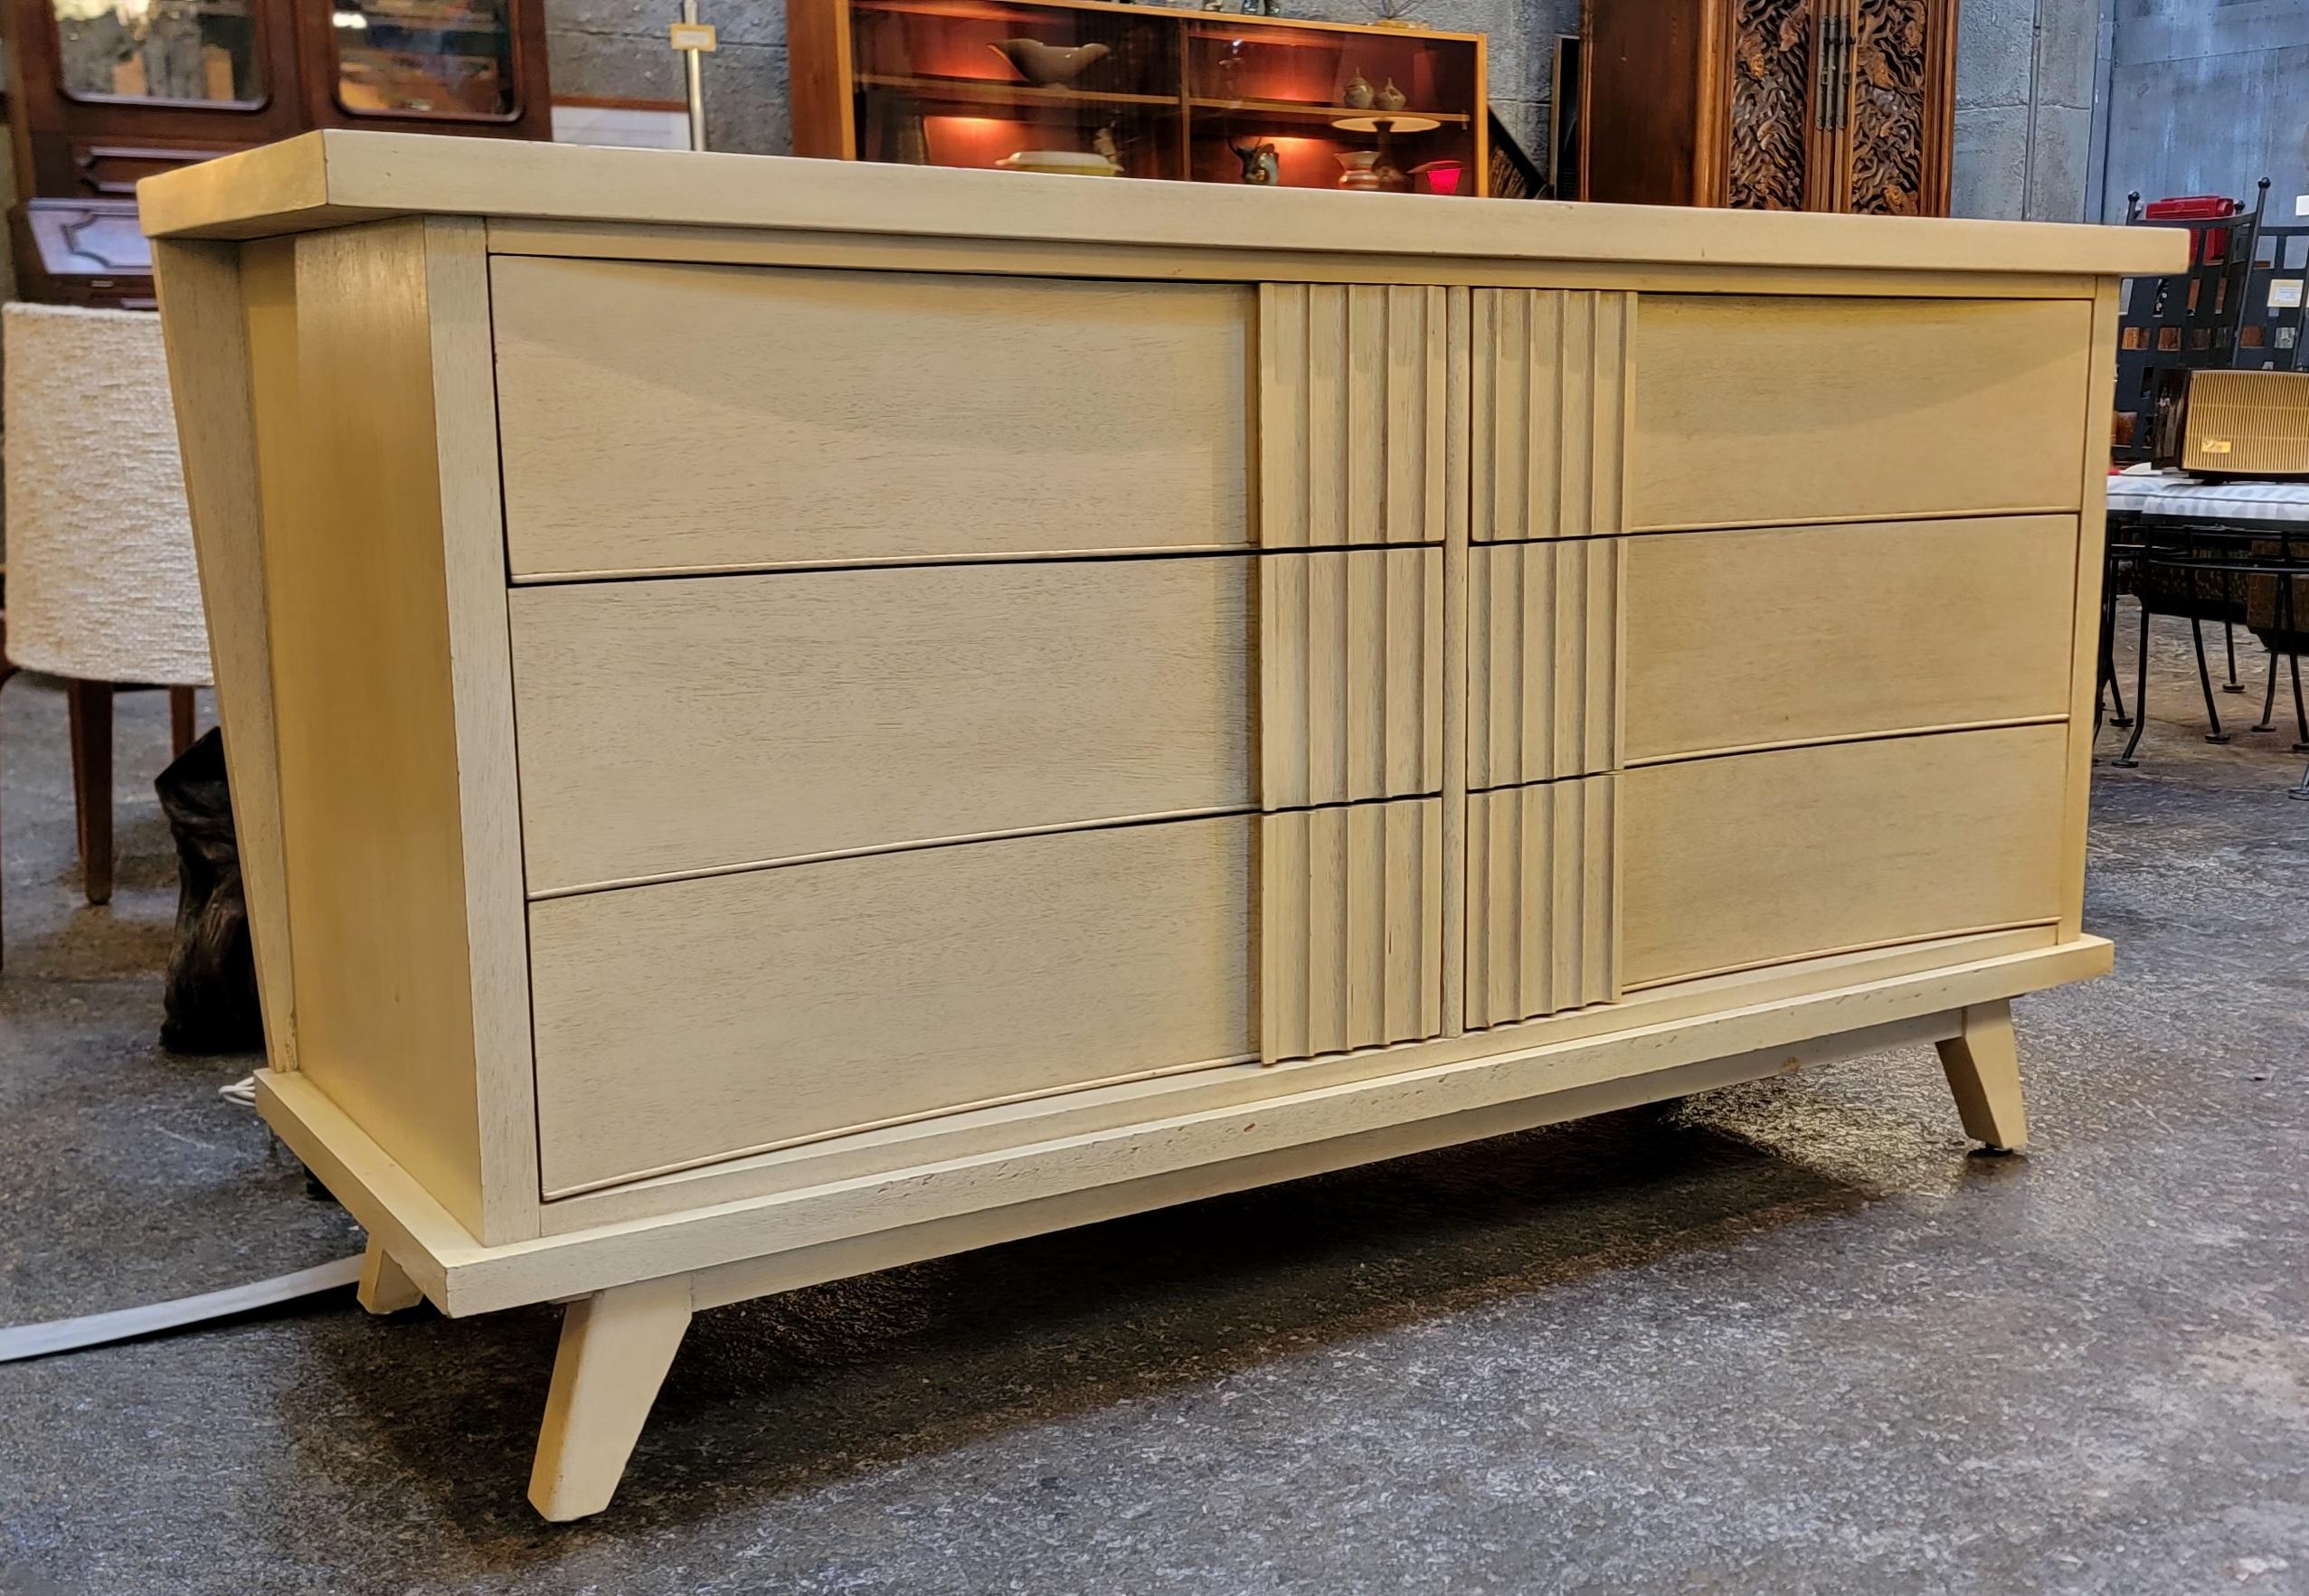 A Futuristic Style low 6 drawer dresser by Dixie Furniture Company. Original cerused / painted finish. Solid oak secondary woods with dovetail construction. Drawers glide easily. All wood materials. Very good original vintage condition. 